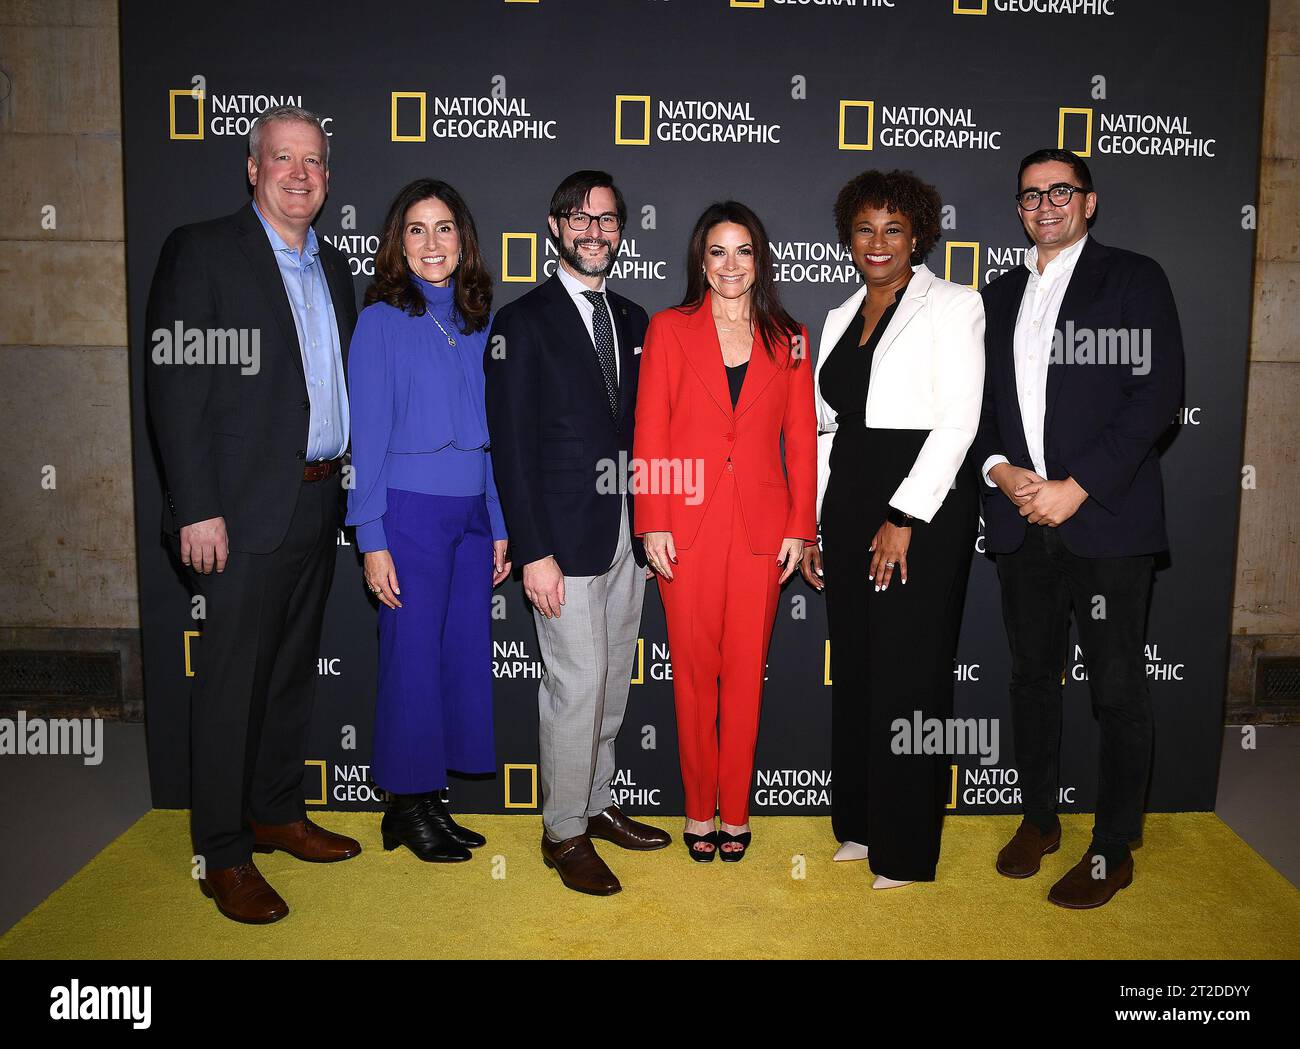 NEW YORK - OCTOBER 18: (L-R) David E. Miller, EVP & General Manager, National Geographic, Carolyn Bernstein, Executive Vice President, Global Scripted Content and Documentary Films at National Geographic, Nathan Lump, SVP, Editor in Chief, National Geographic, Courteney Monroe, President, National Geographic Content, Karen Greenfield, Senior Vice President of Content, Diversity and Inclusion, and Tom McDonald, EVP Global Factual & Unscripted, National Geographic attend the National Geographic Content Showcase at Hall des Lumieres on October 18, 2023 in New York City. (Photo by Anthony Behar/Pi Stock Photo